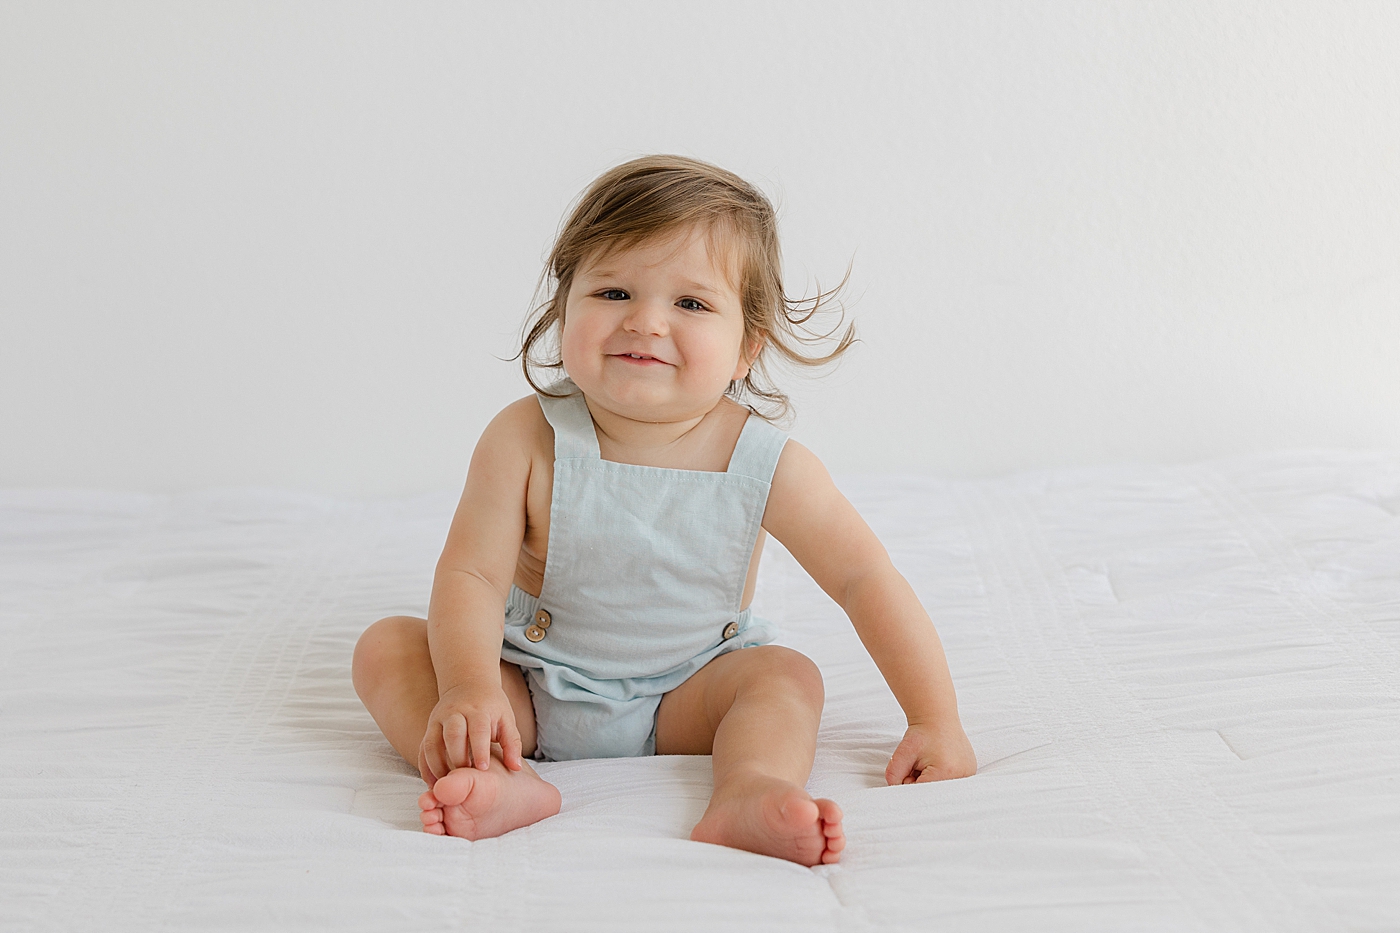 Baby girl in a light blue romper sitting on a bed | Photo by Sana Ahmed Photography